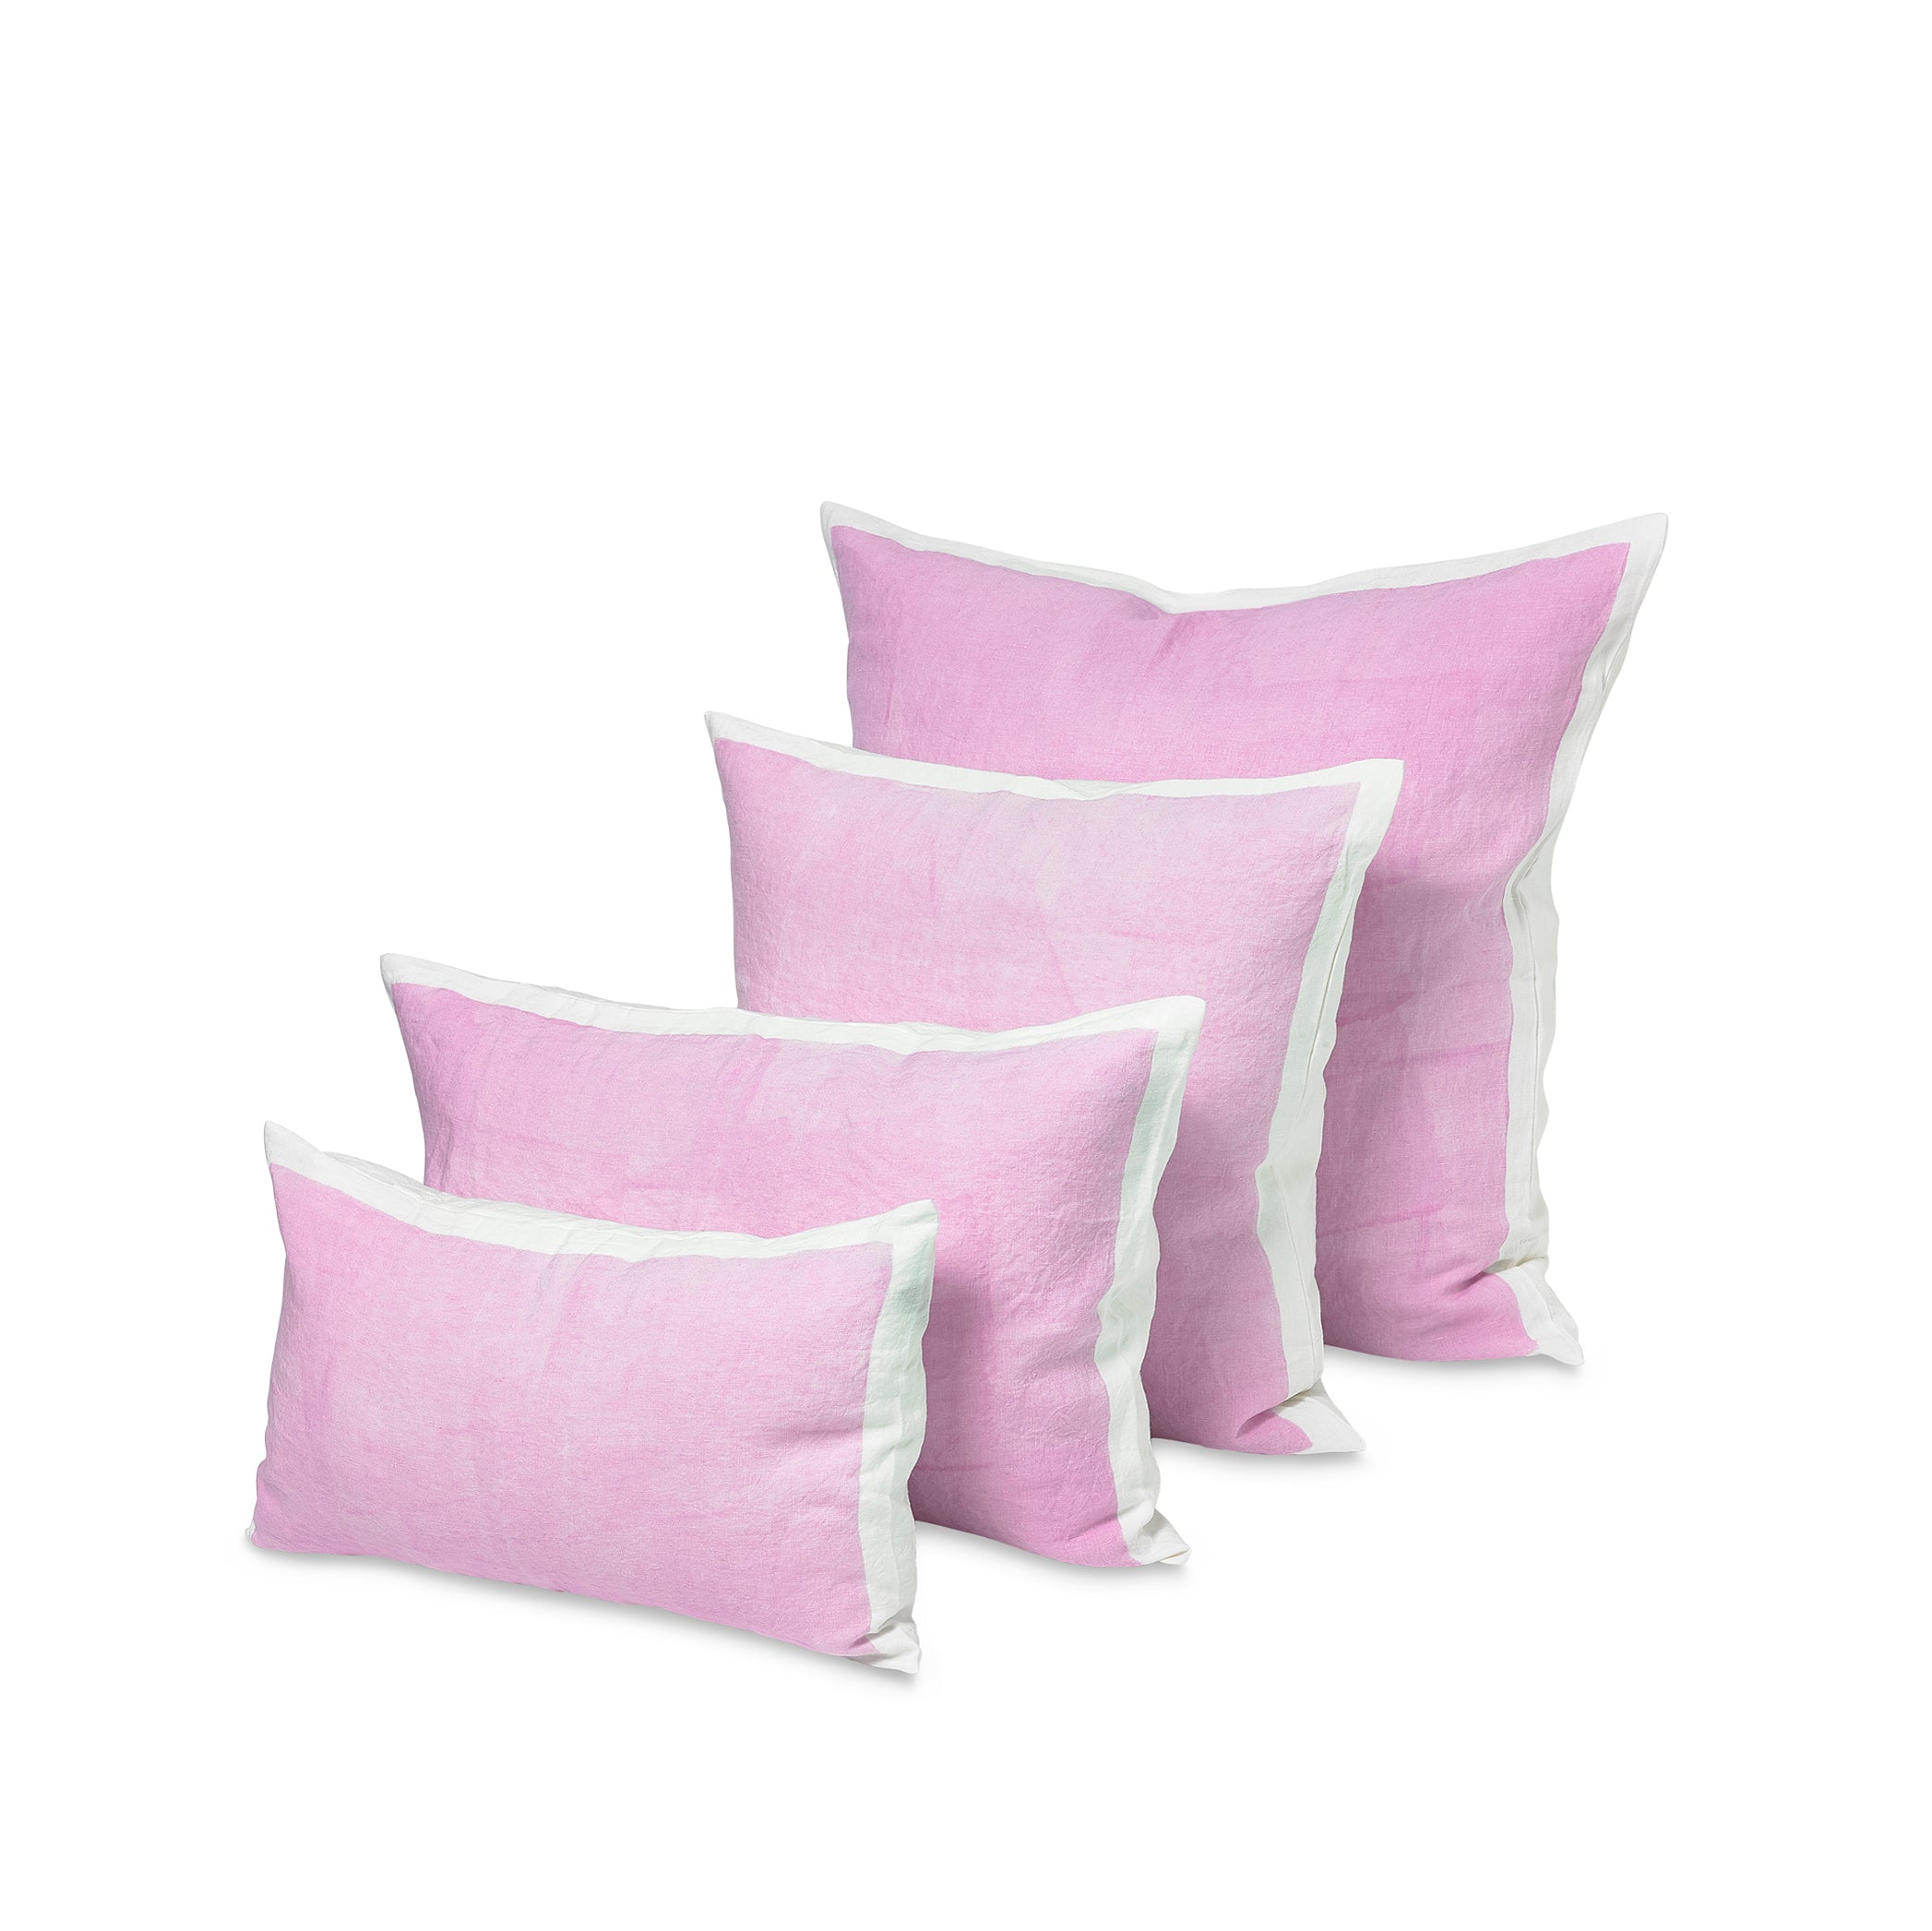 Hand Painted Linen Cushion in Pale Pink, 50cm x 50cm